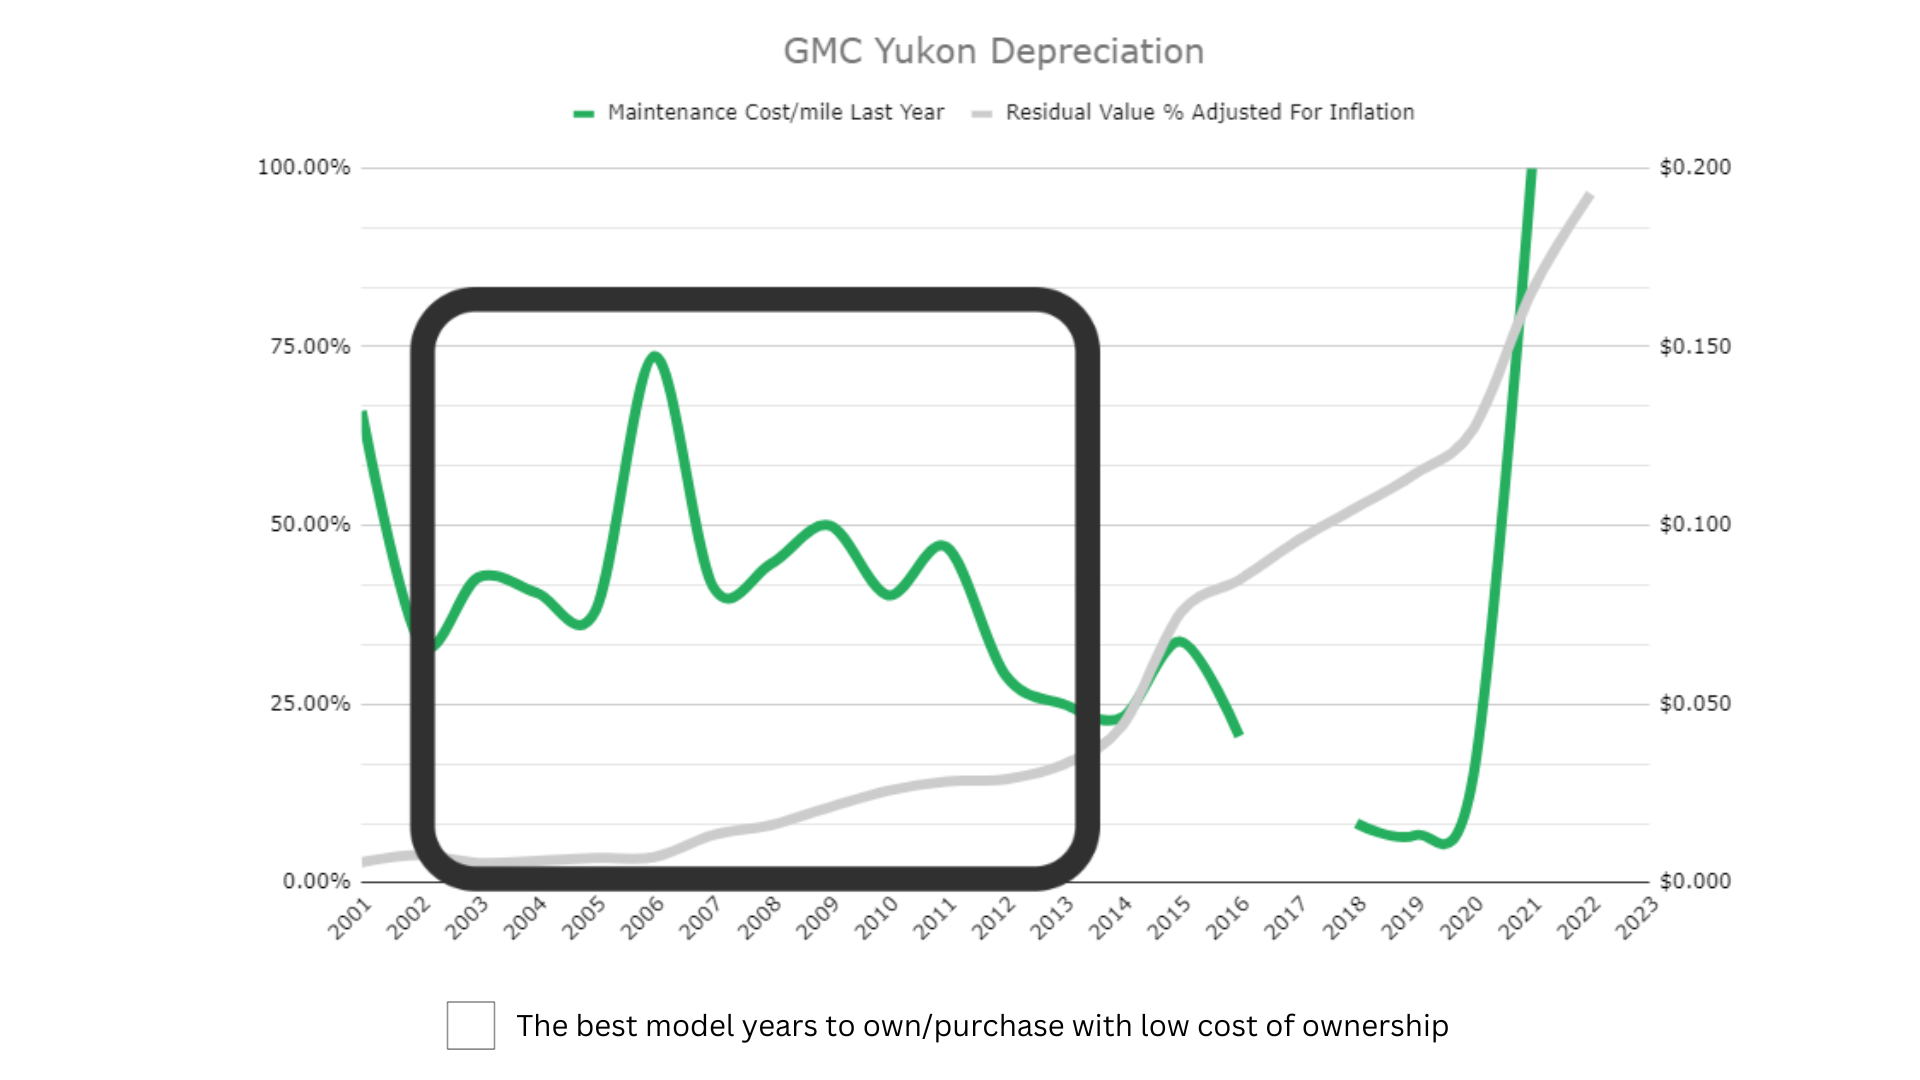 A chart showing the depreciation of the GMC Yukon . It shows the best time to own/purchase a GMC Yukon